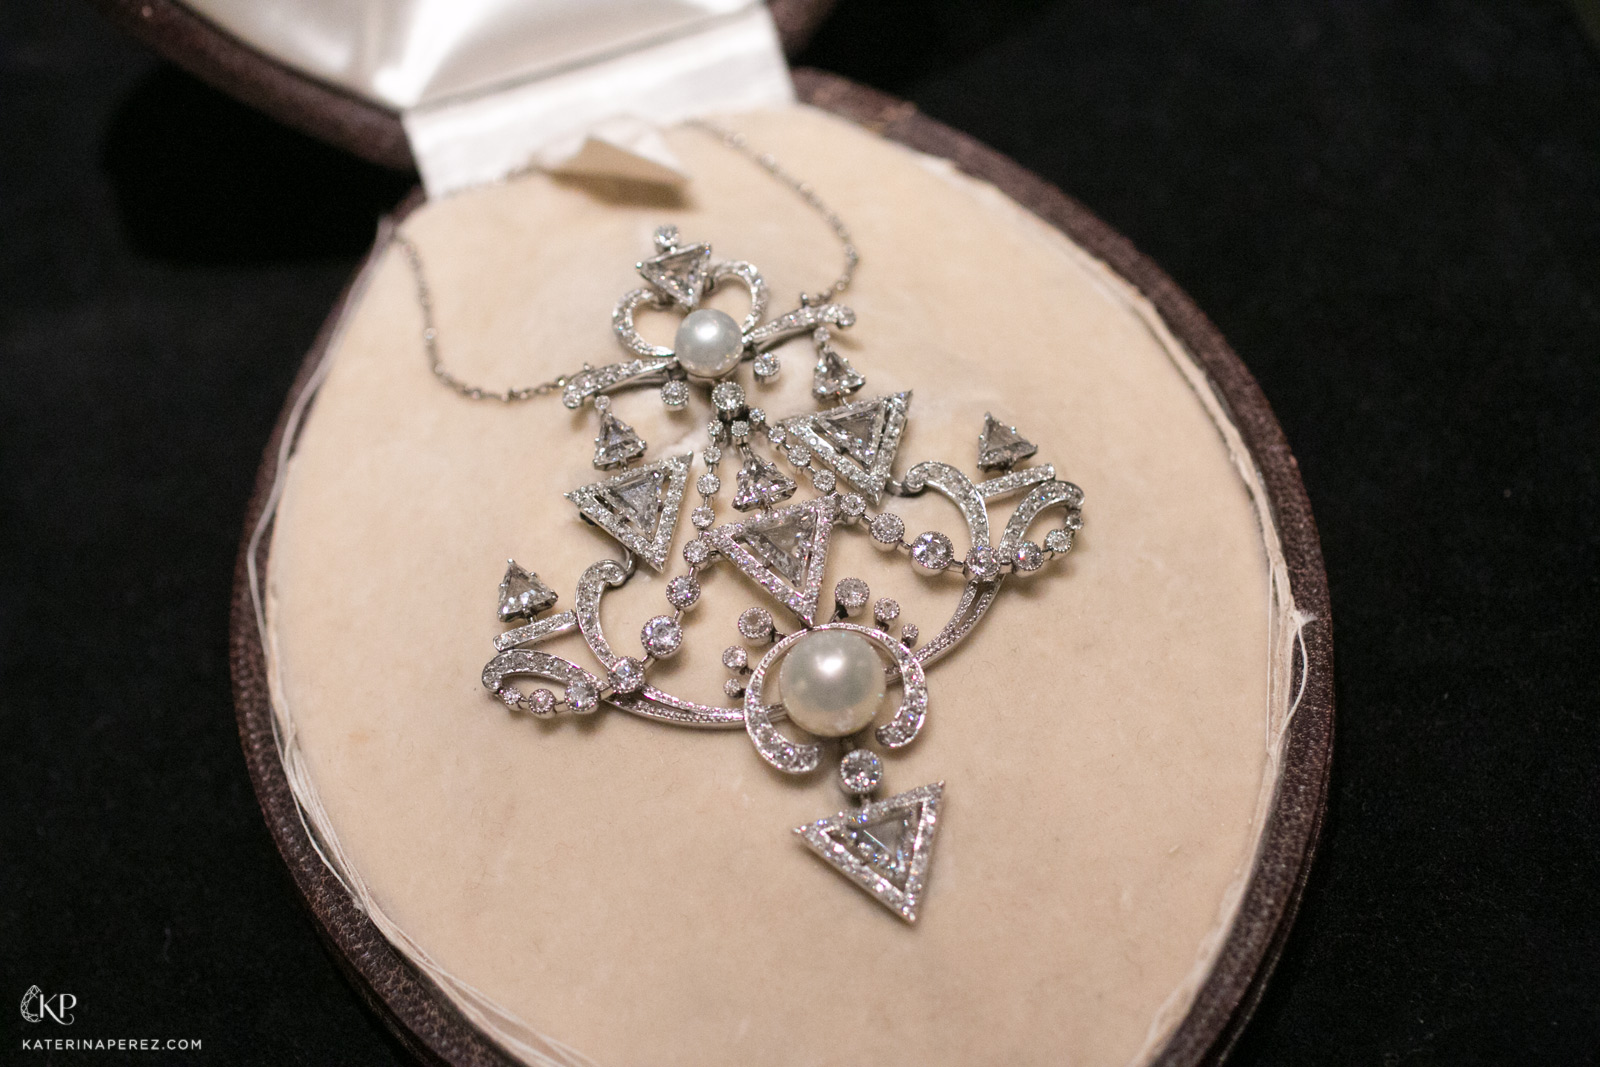 Paul Templier pendant with diamonds and pearls available at A La Vieille Russie 